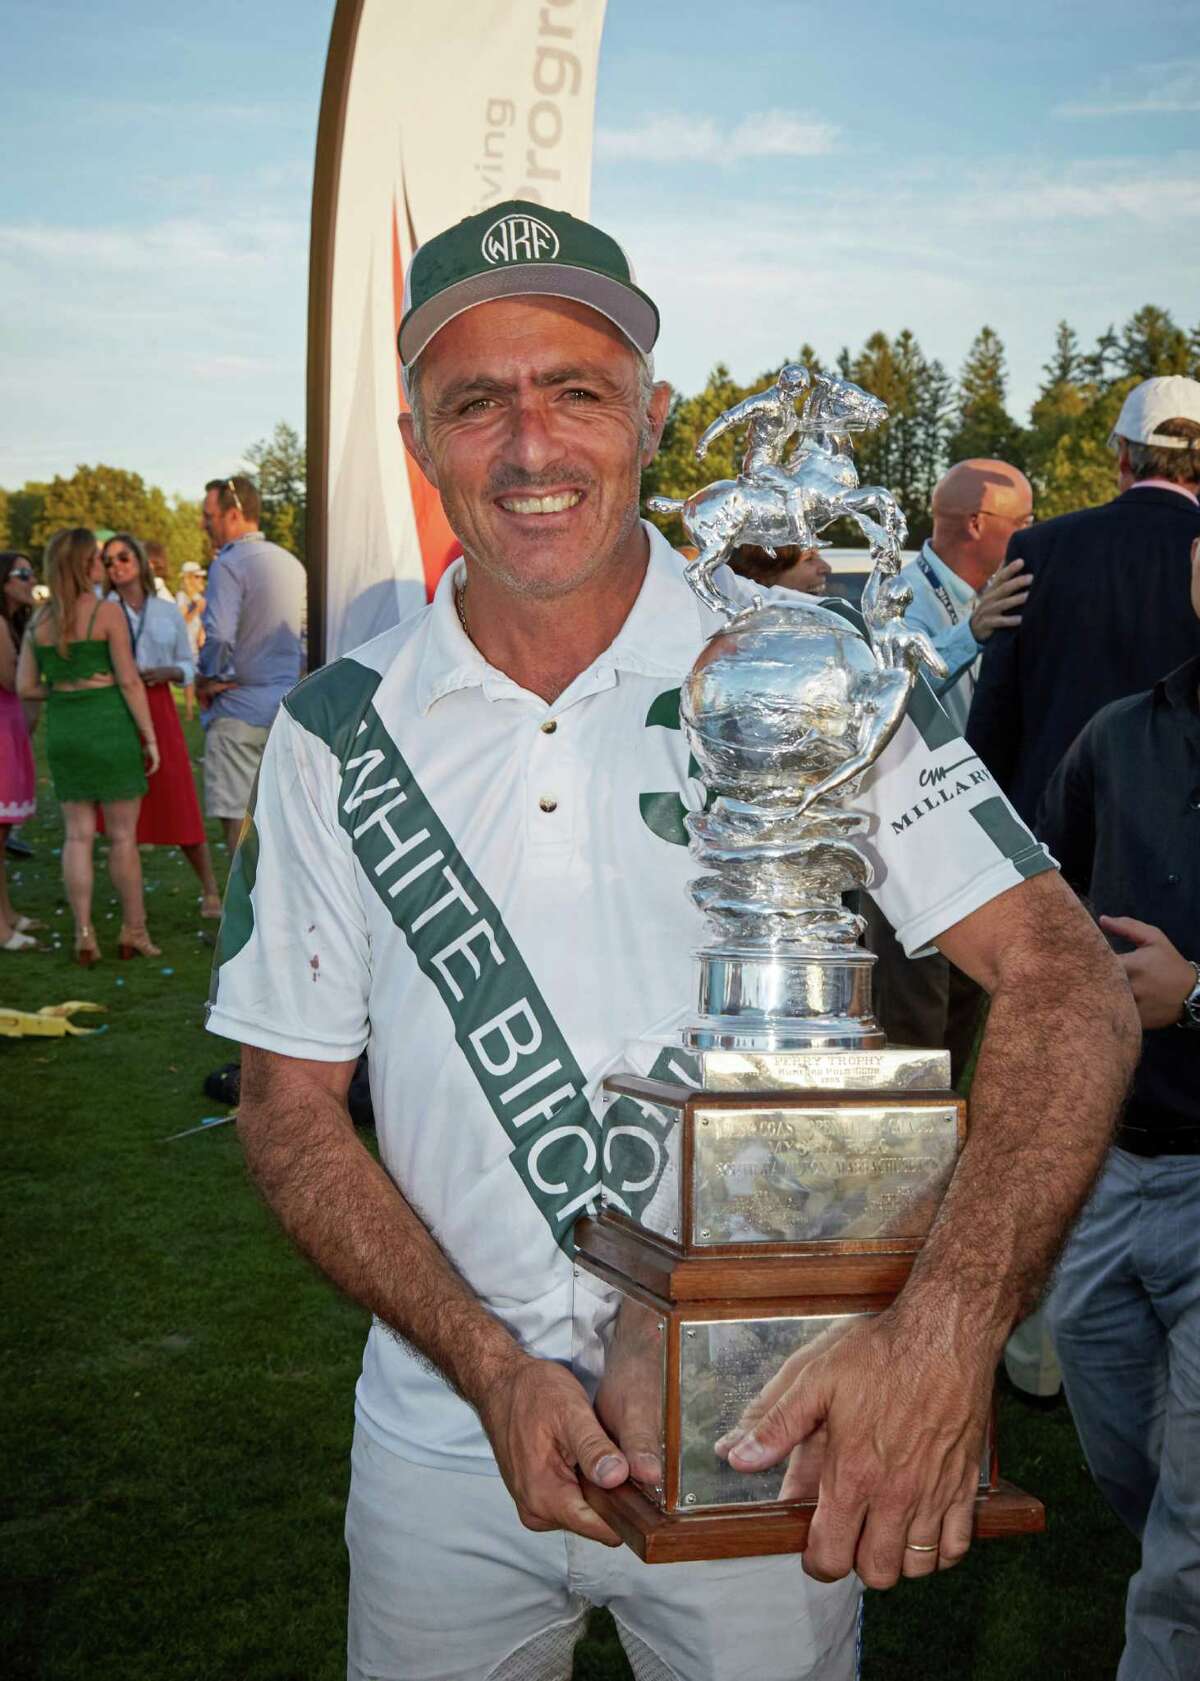 White Birch's Mariano Aguerre held the Perry Trophy after winning the 2016 East Coast Open in Greenwich.